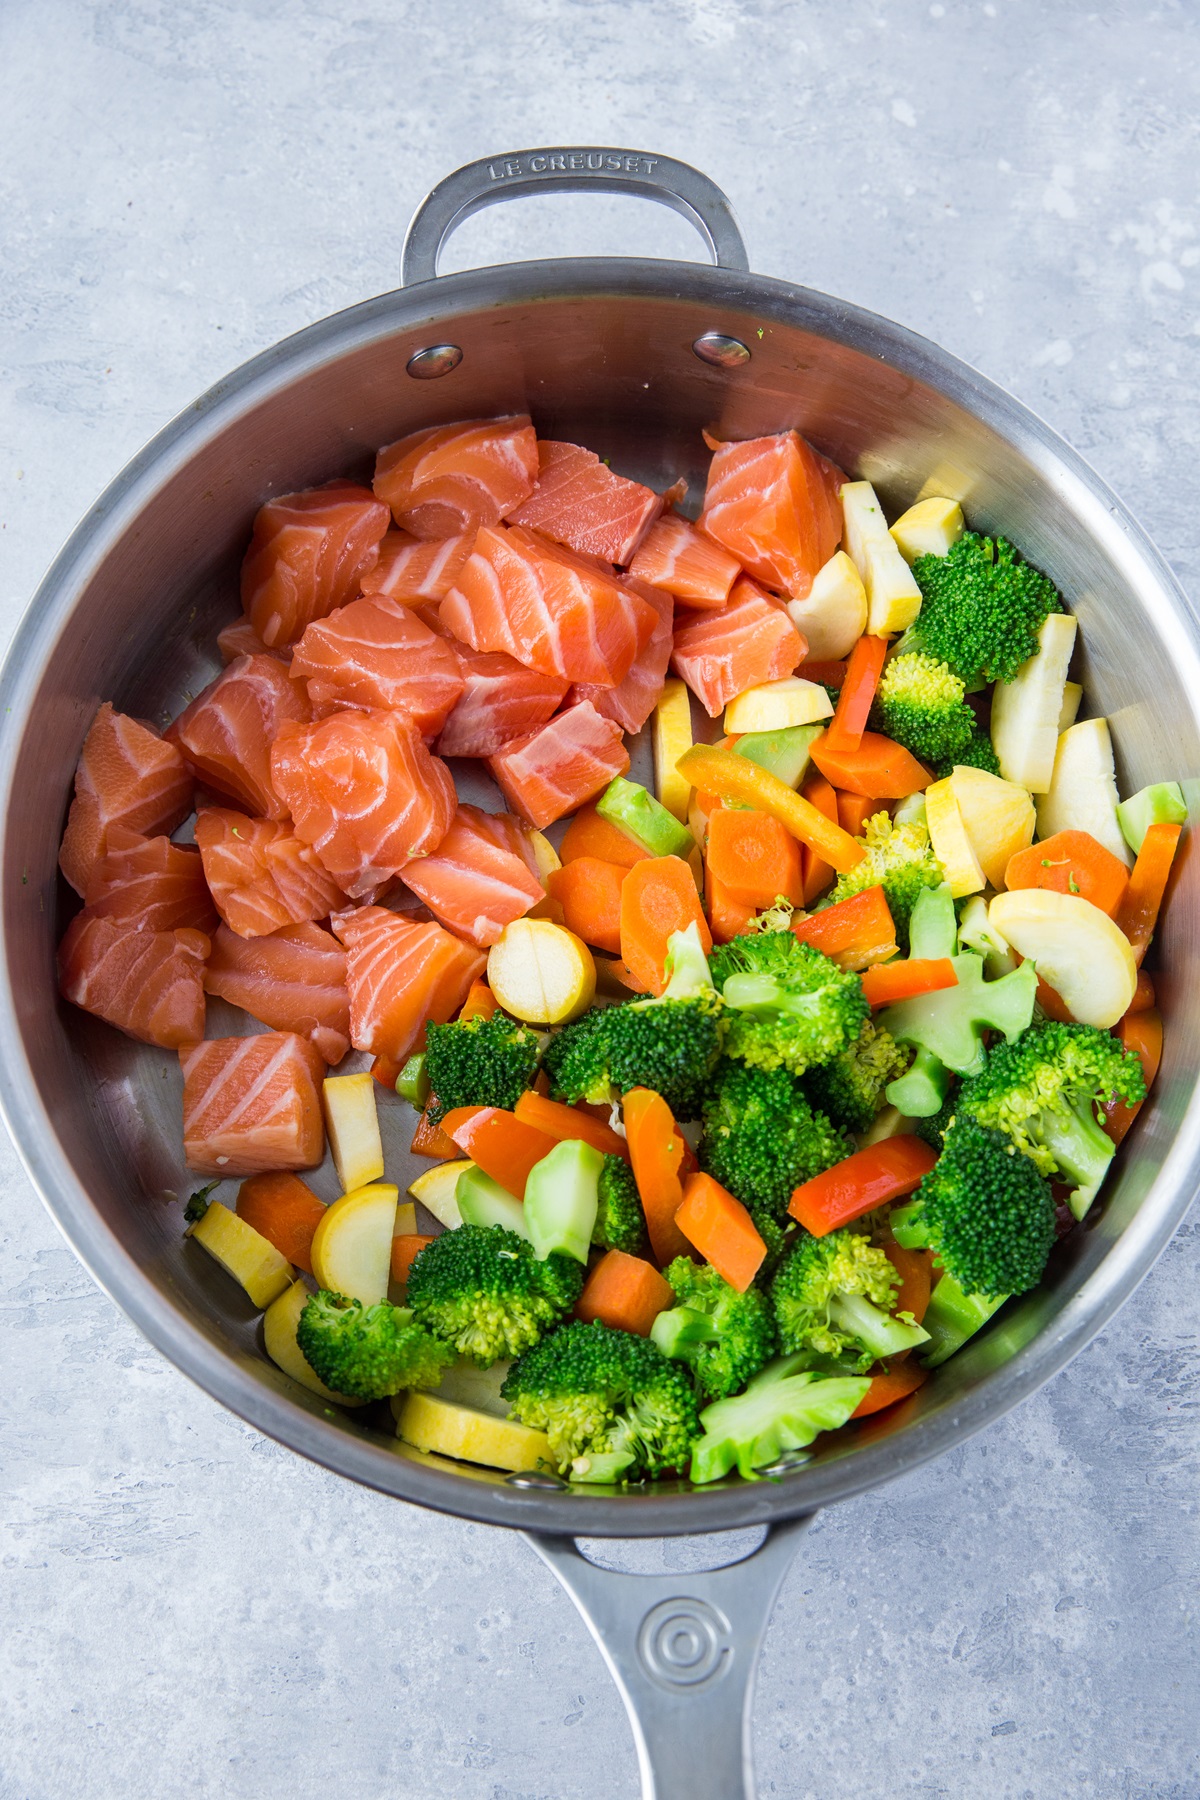 Raw chopped salmon pieces and chopped vegetables in a skillet to make salmon stir fry.